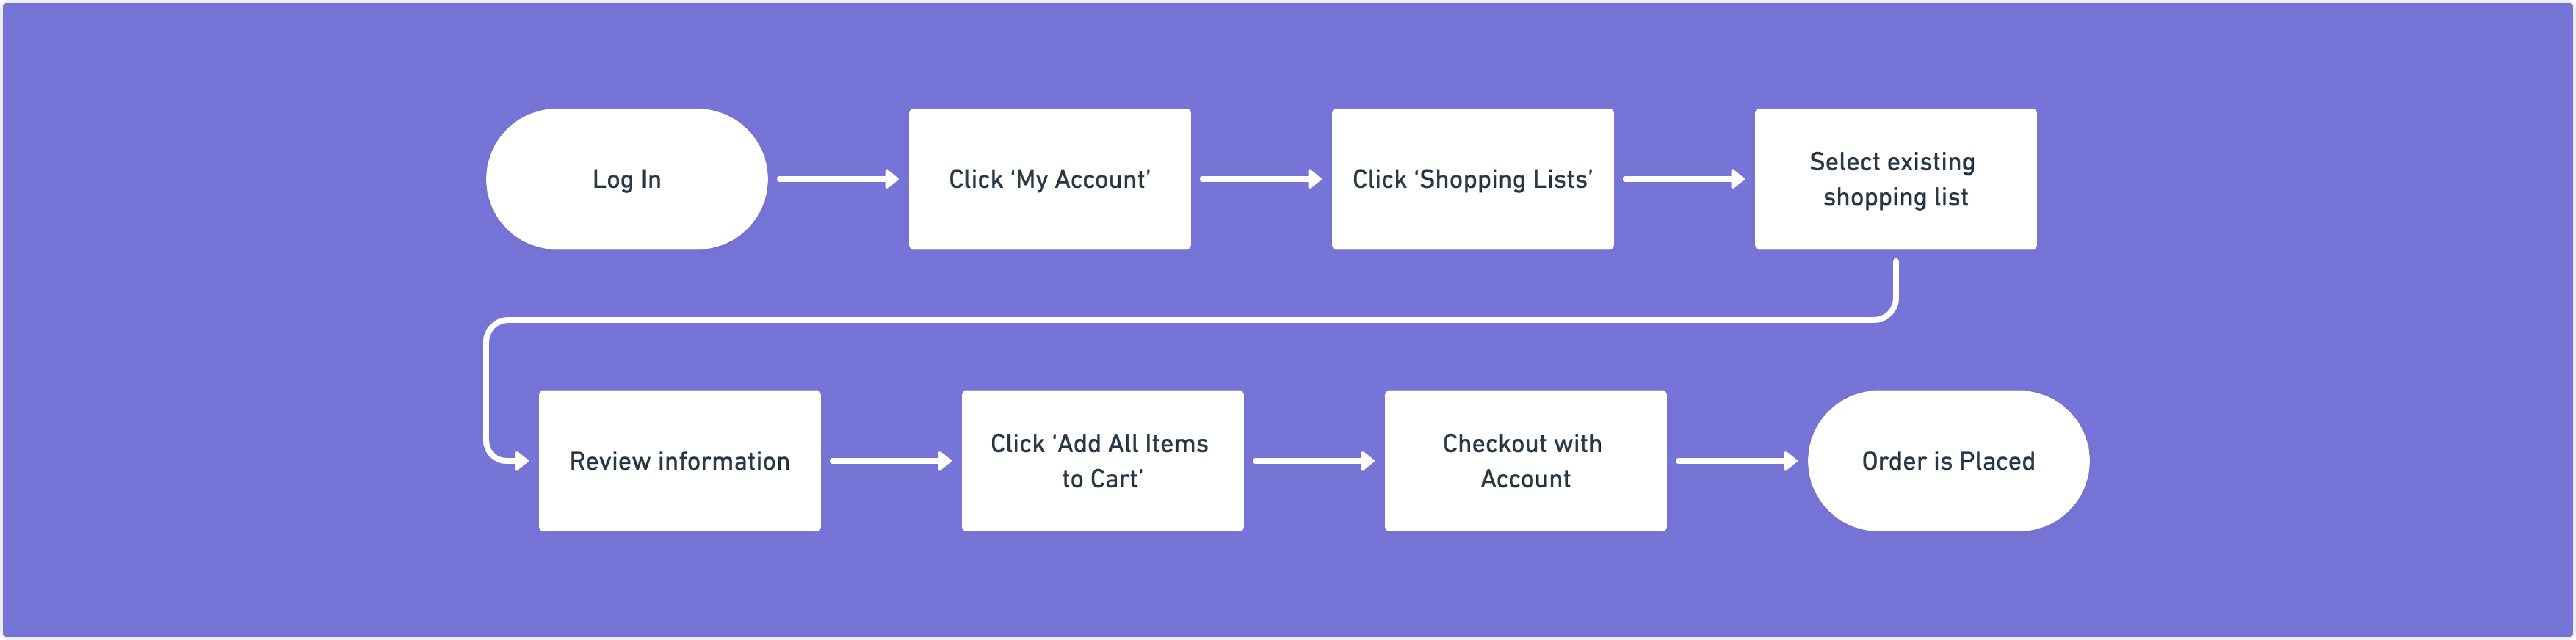 User Journey for checking out with a Shopping List